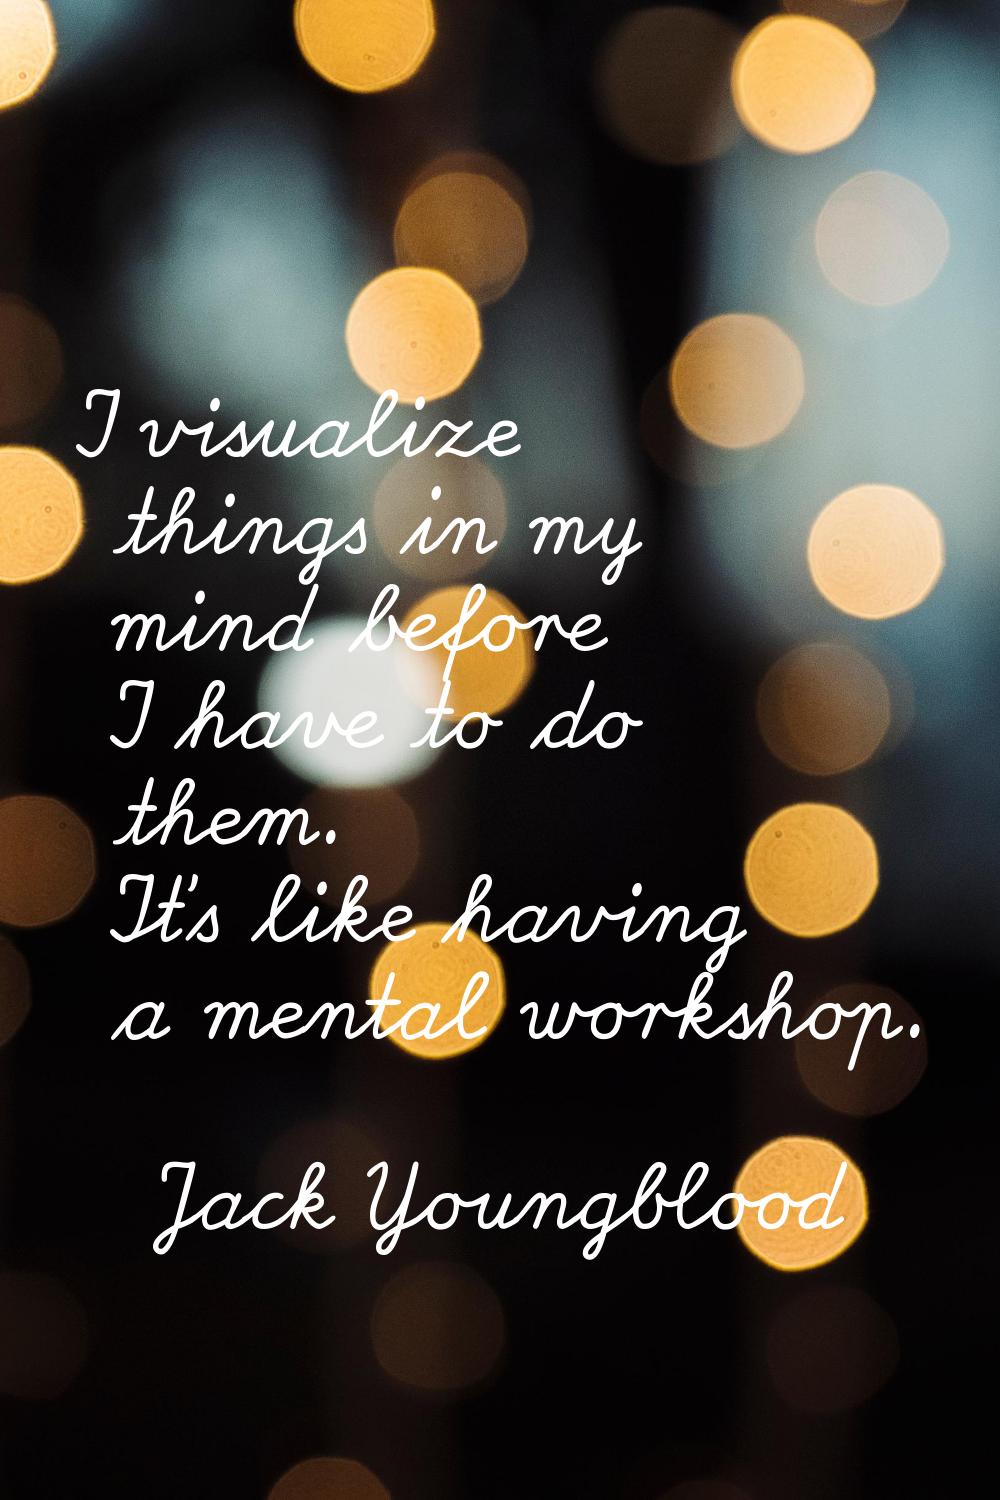 I visualize things in my mind before I have to do them. It's like having a mental workshop.